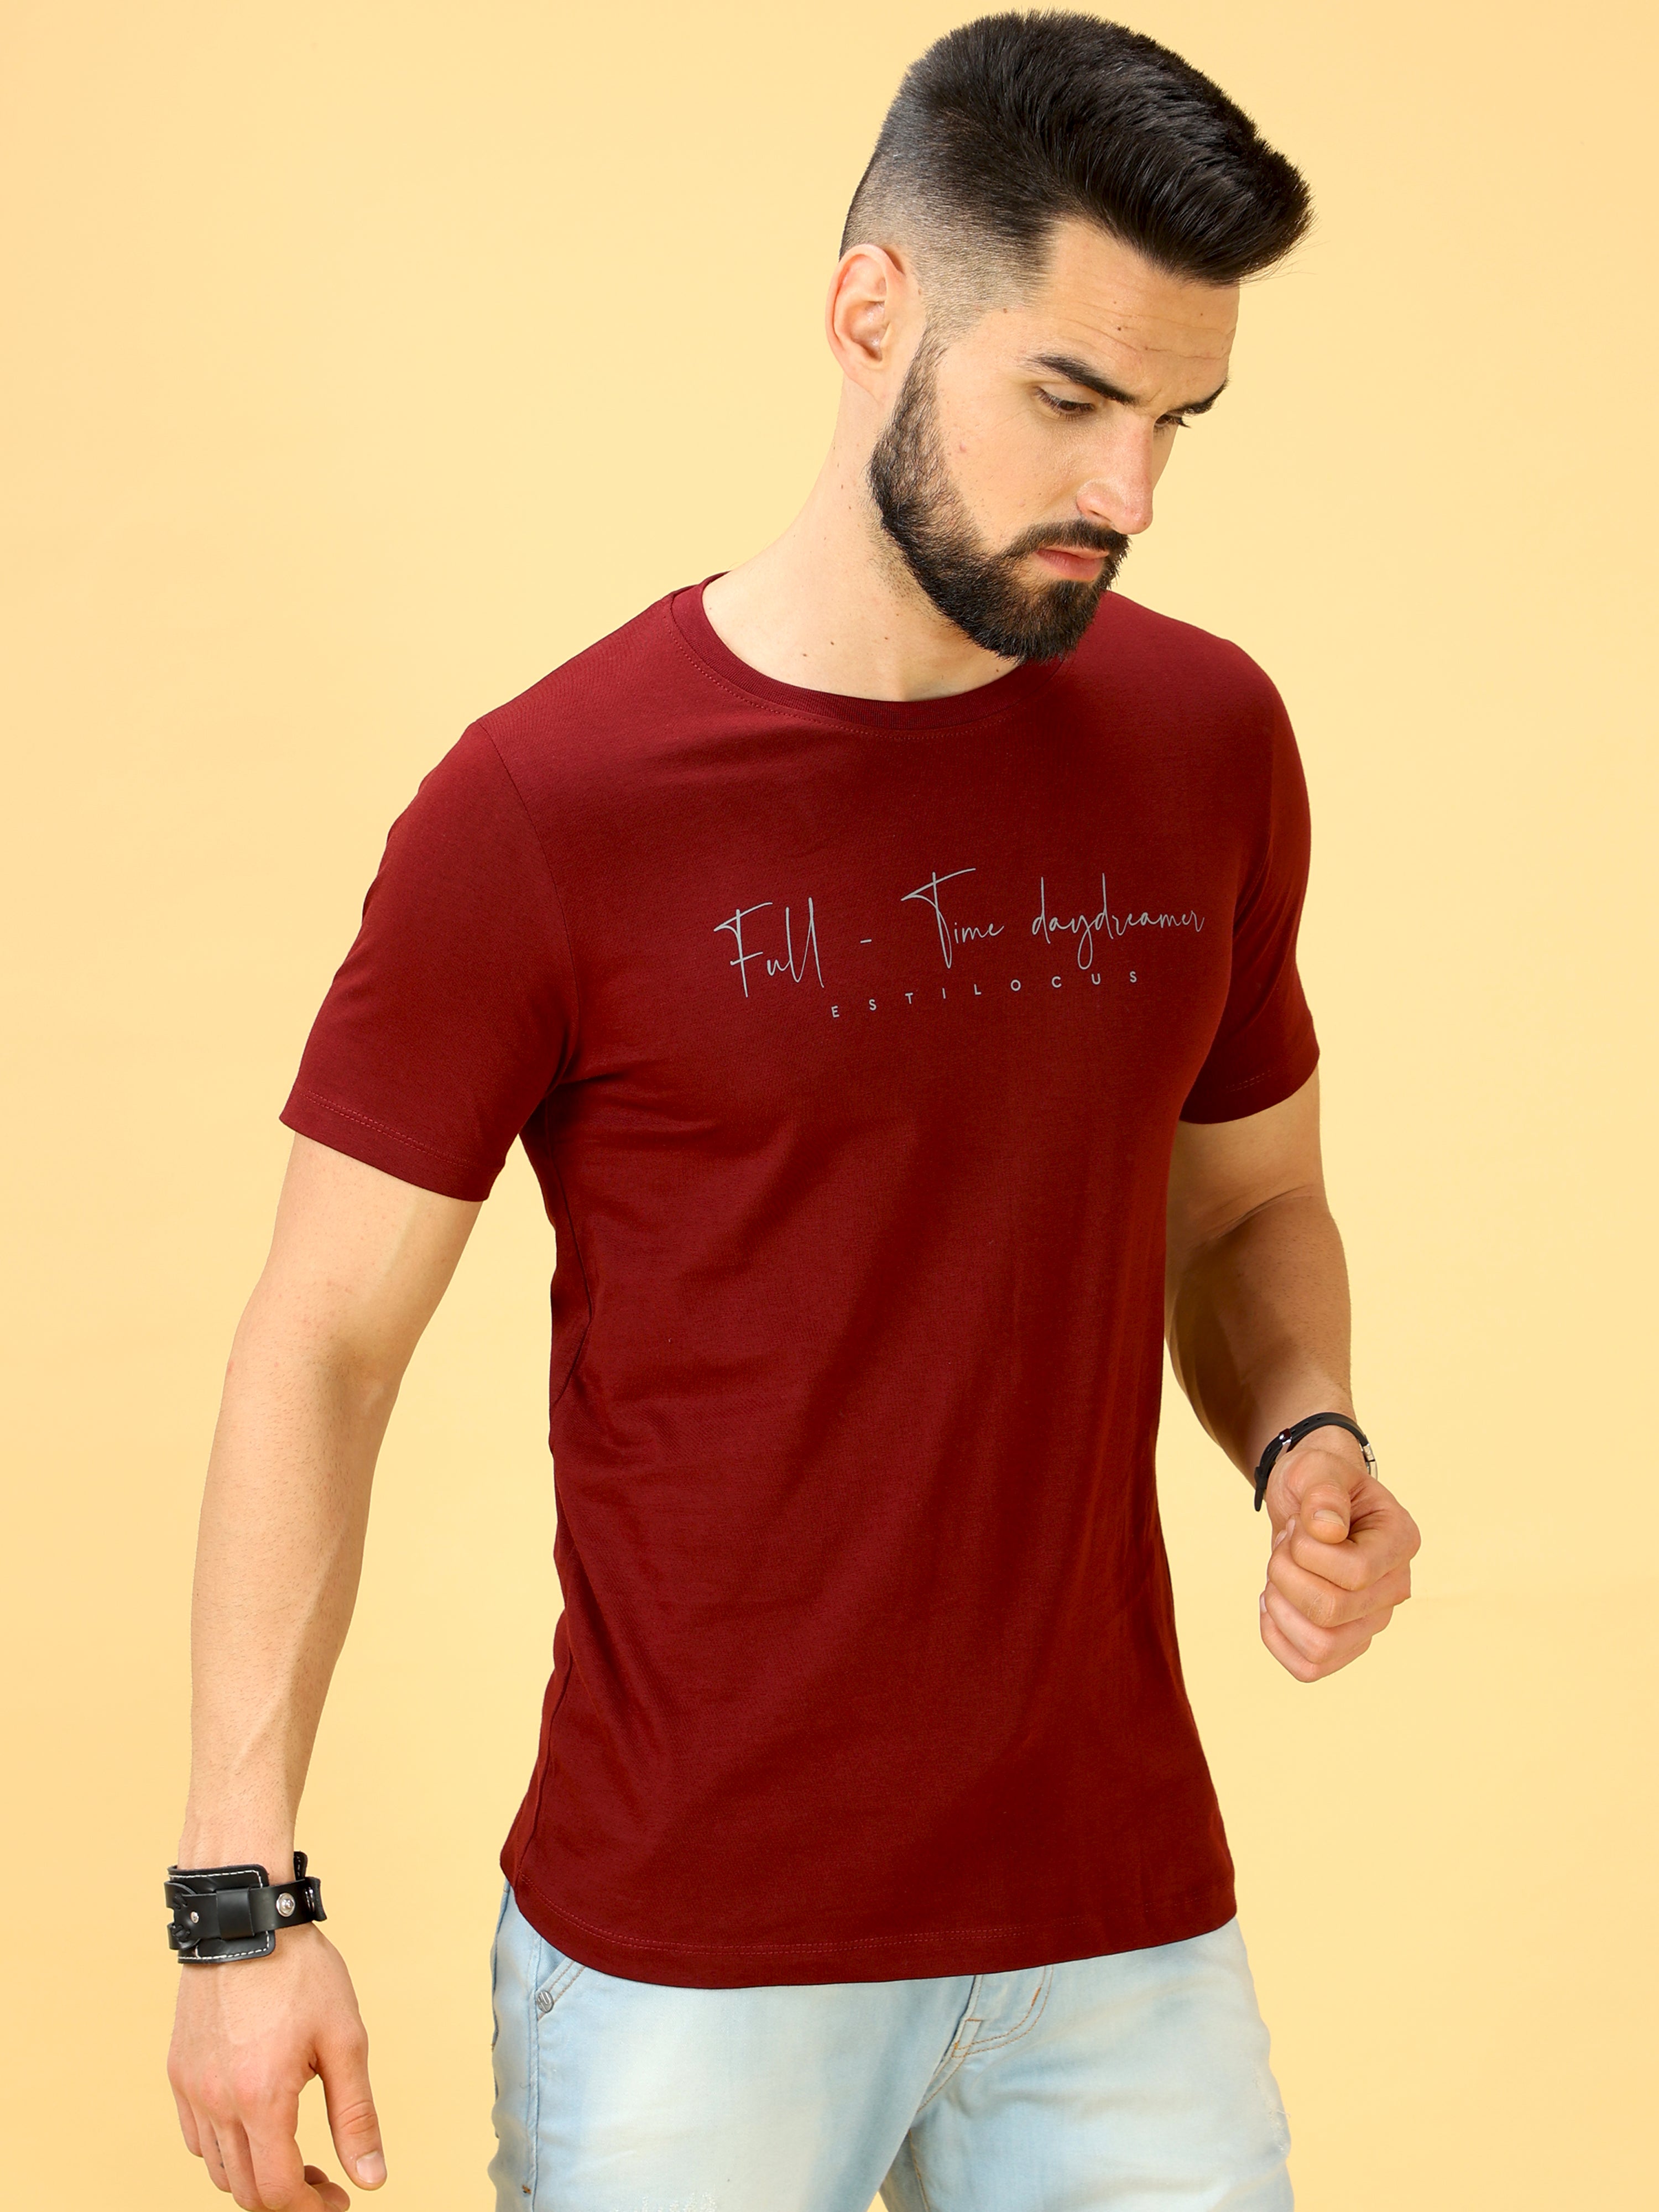 Full Time Daydreamer Grey Print Crew Neck T-Shirt shop online at Estilocus. This pure cotton printed T-shirt is a stylish go-to for laidback days. Cut in a comfy regular fit. • 100% Cotton knitted interlock 190GSM• Bio washed fabric• Round neck T-shirt •